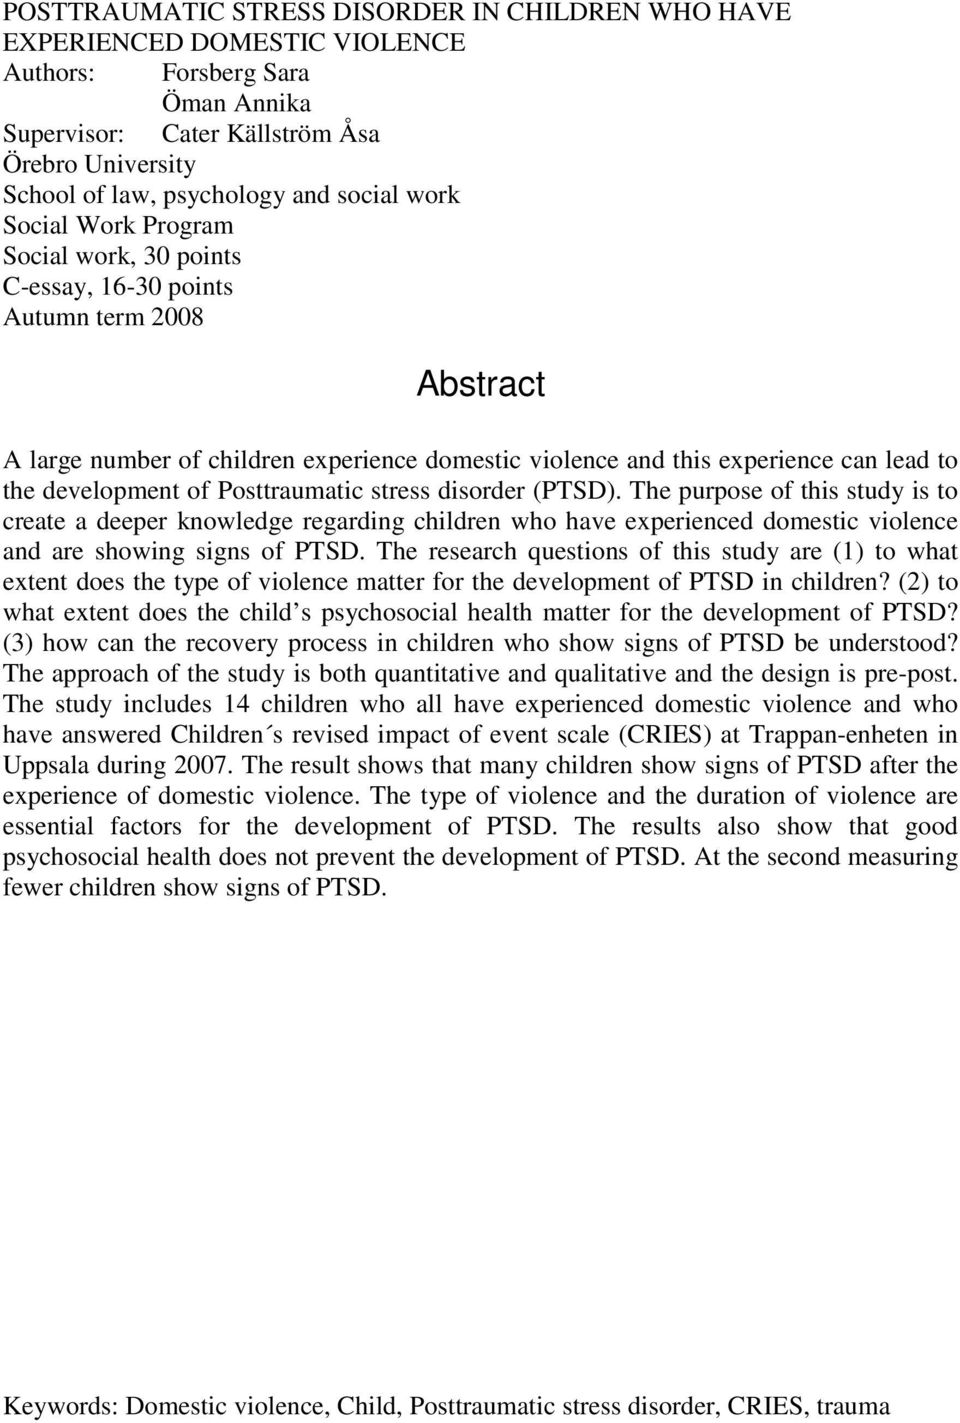 development of Posttraumatic stress disorder (PTSD). The purpose of this study is to create a deeper knowledge regarding children who have experienced domestic violence and are showing signs of PTSD.